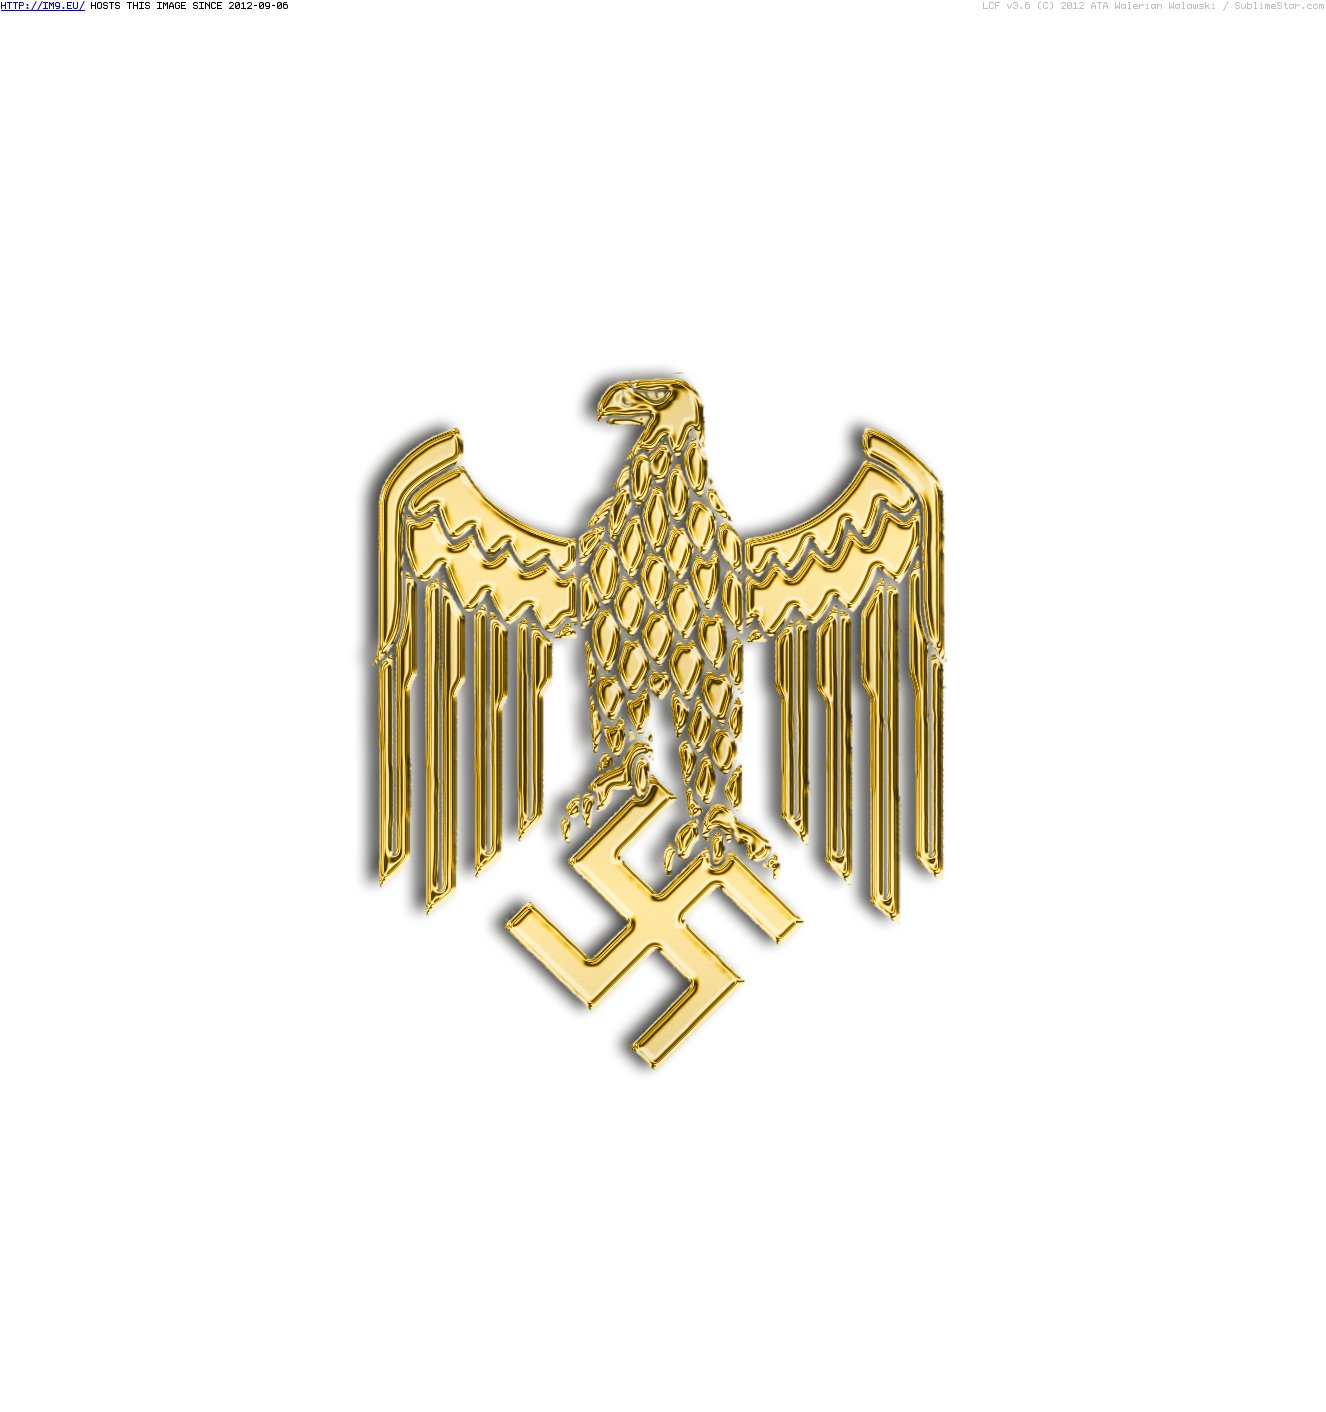 Golden New Nazi Eagle, Transparent (in Historical photos of nazi Germany)